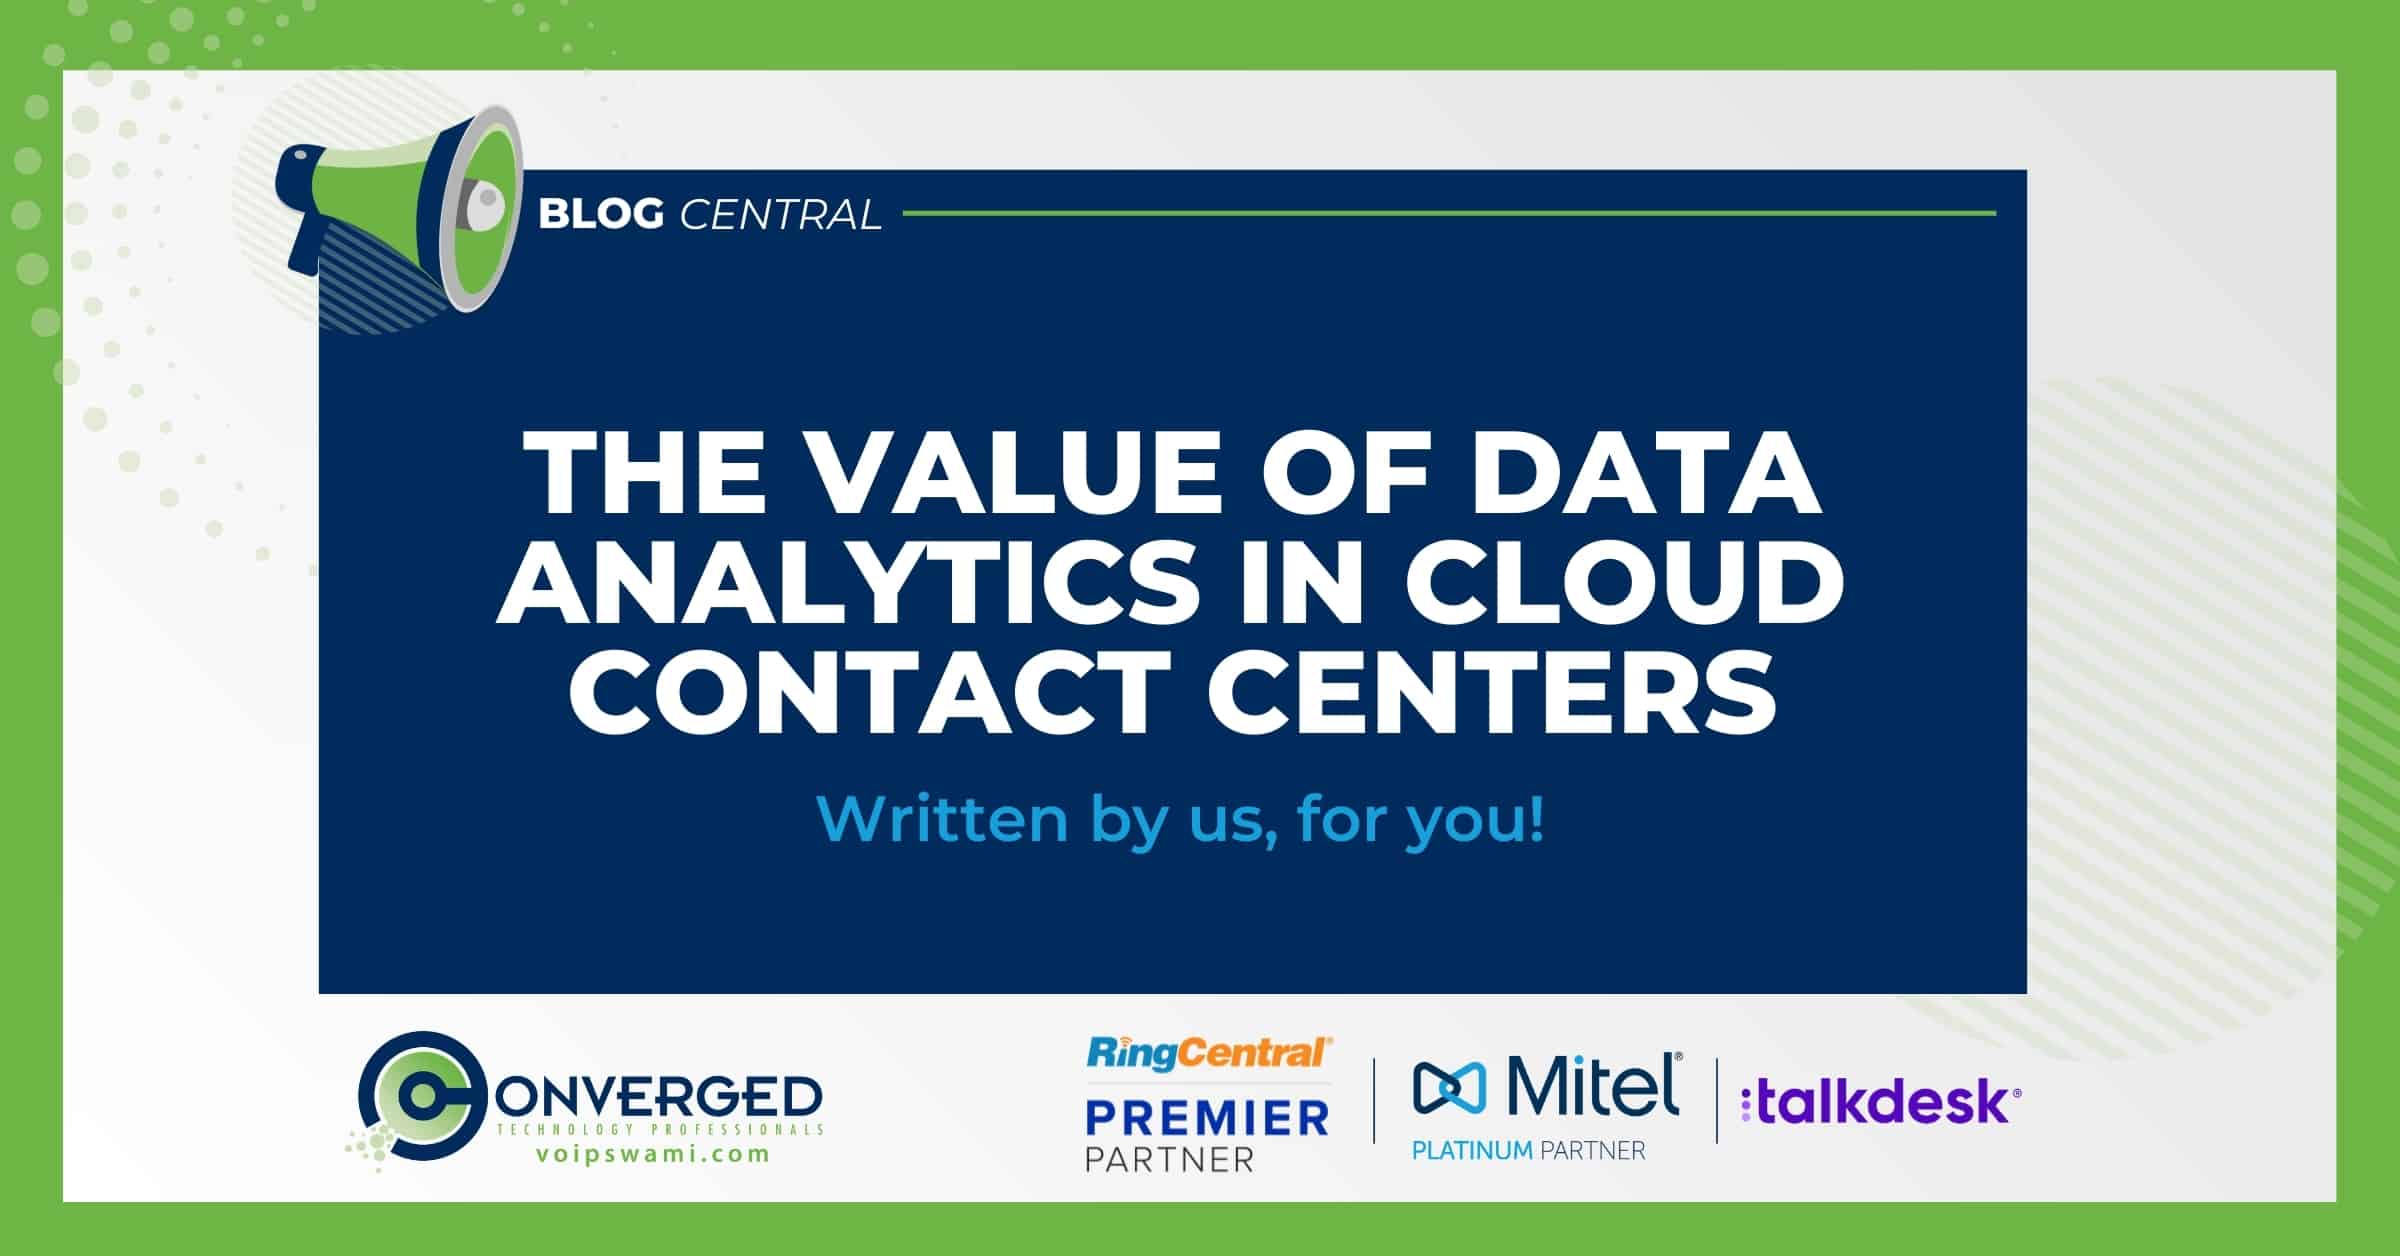 The Value of Data Analytics in Cloud Contact Centers